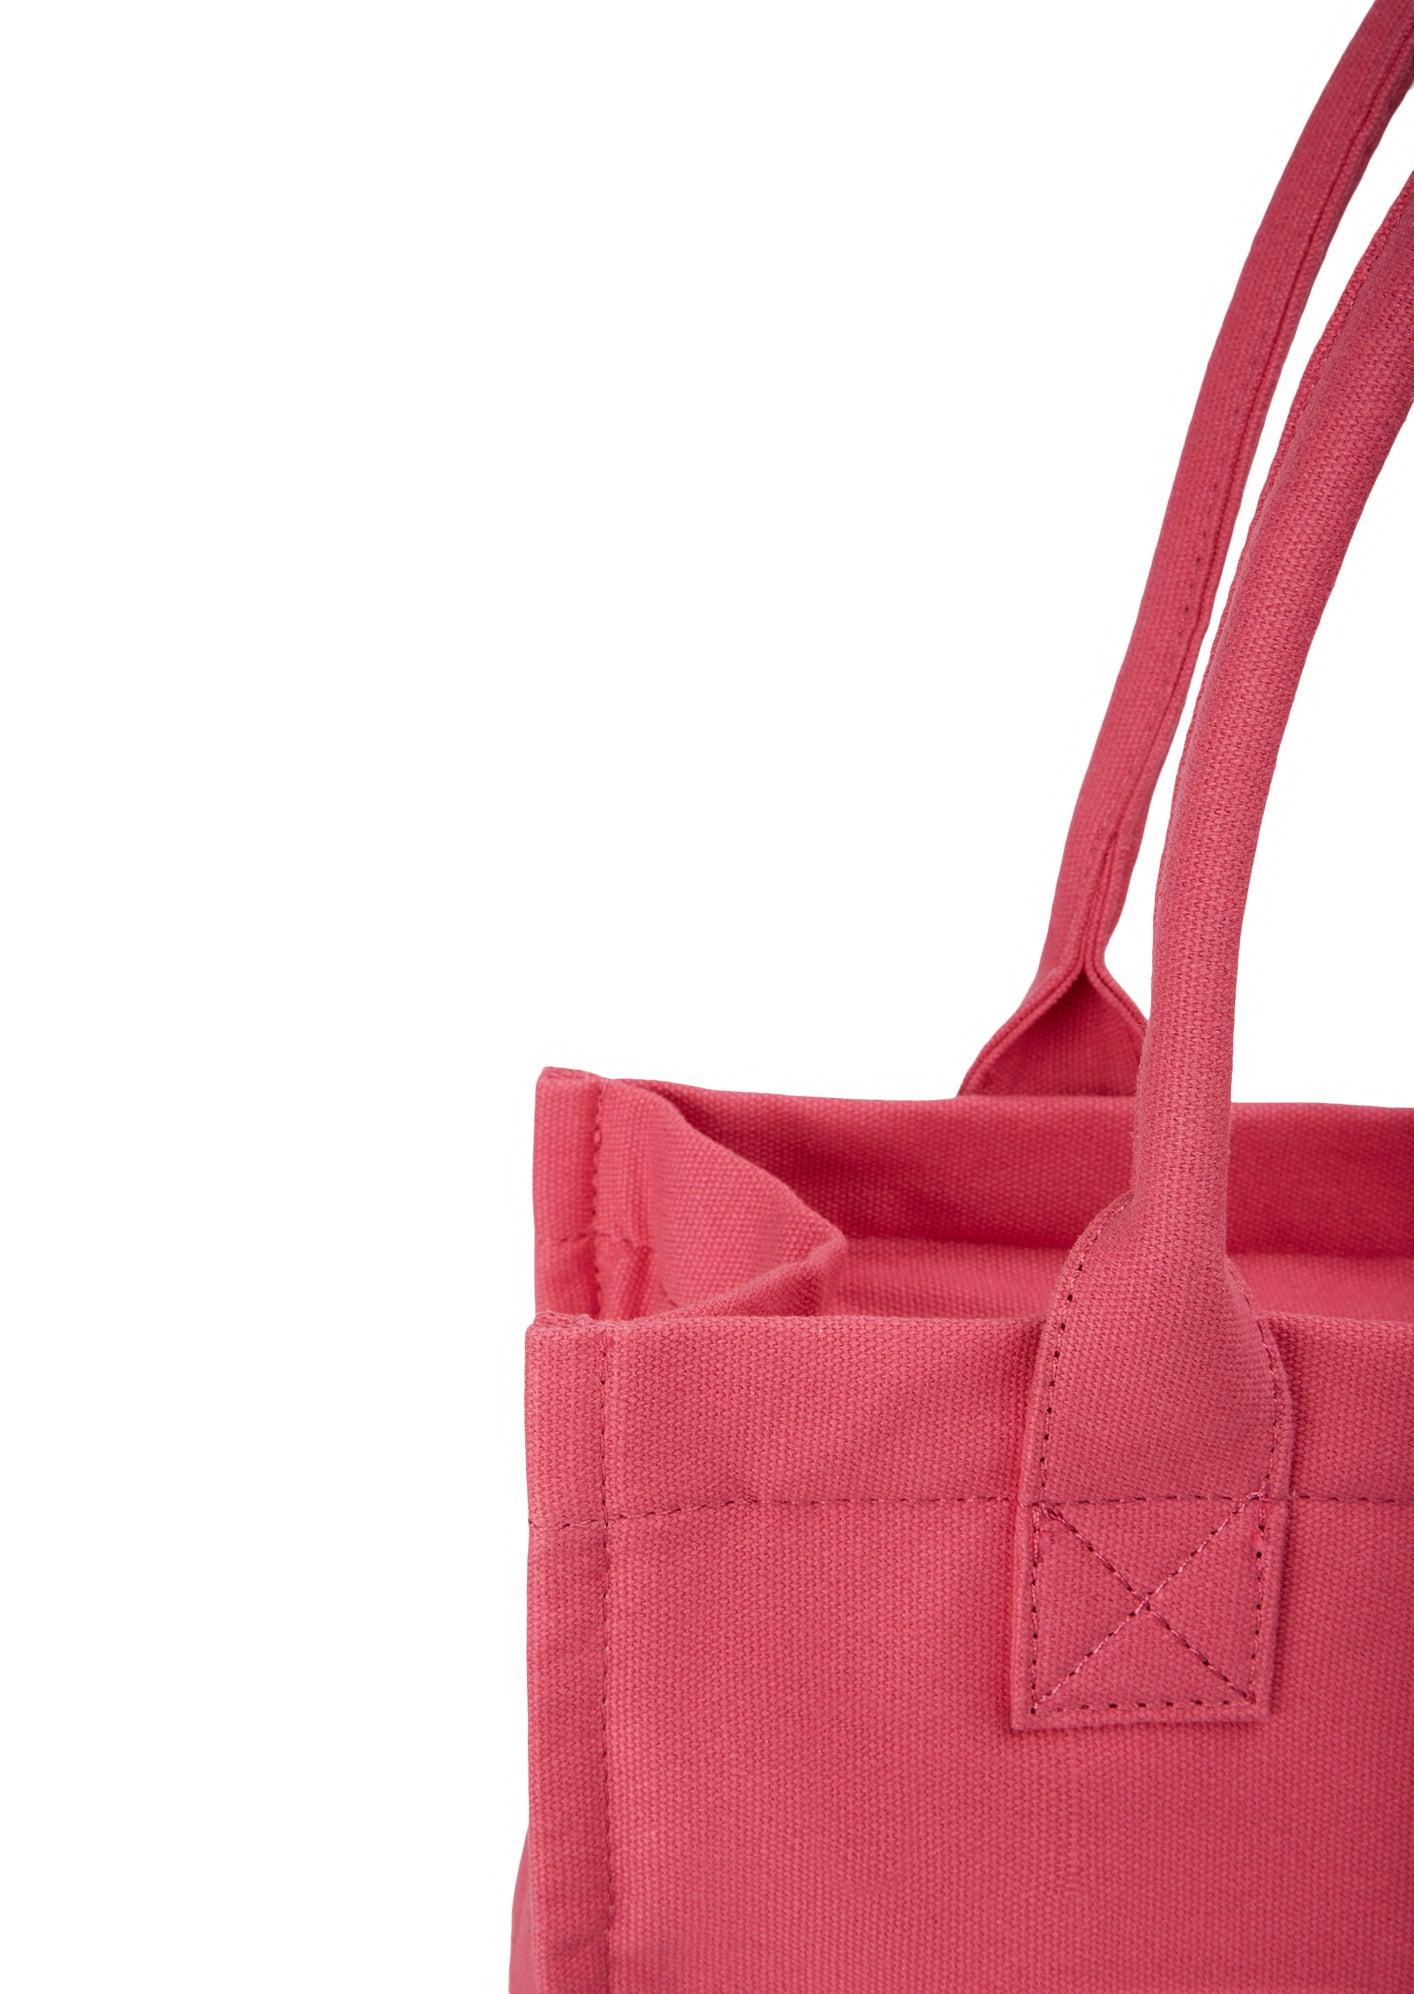 Tony Bianco Claire Tote Bag in Pink | Lyst